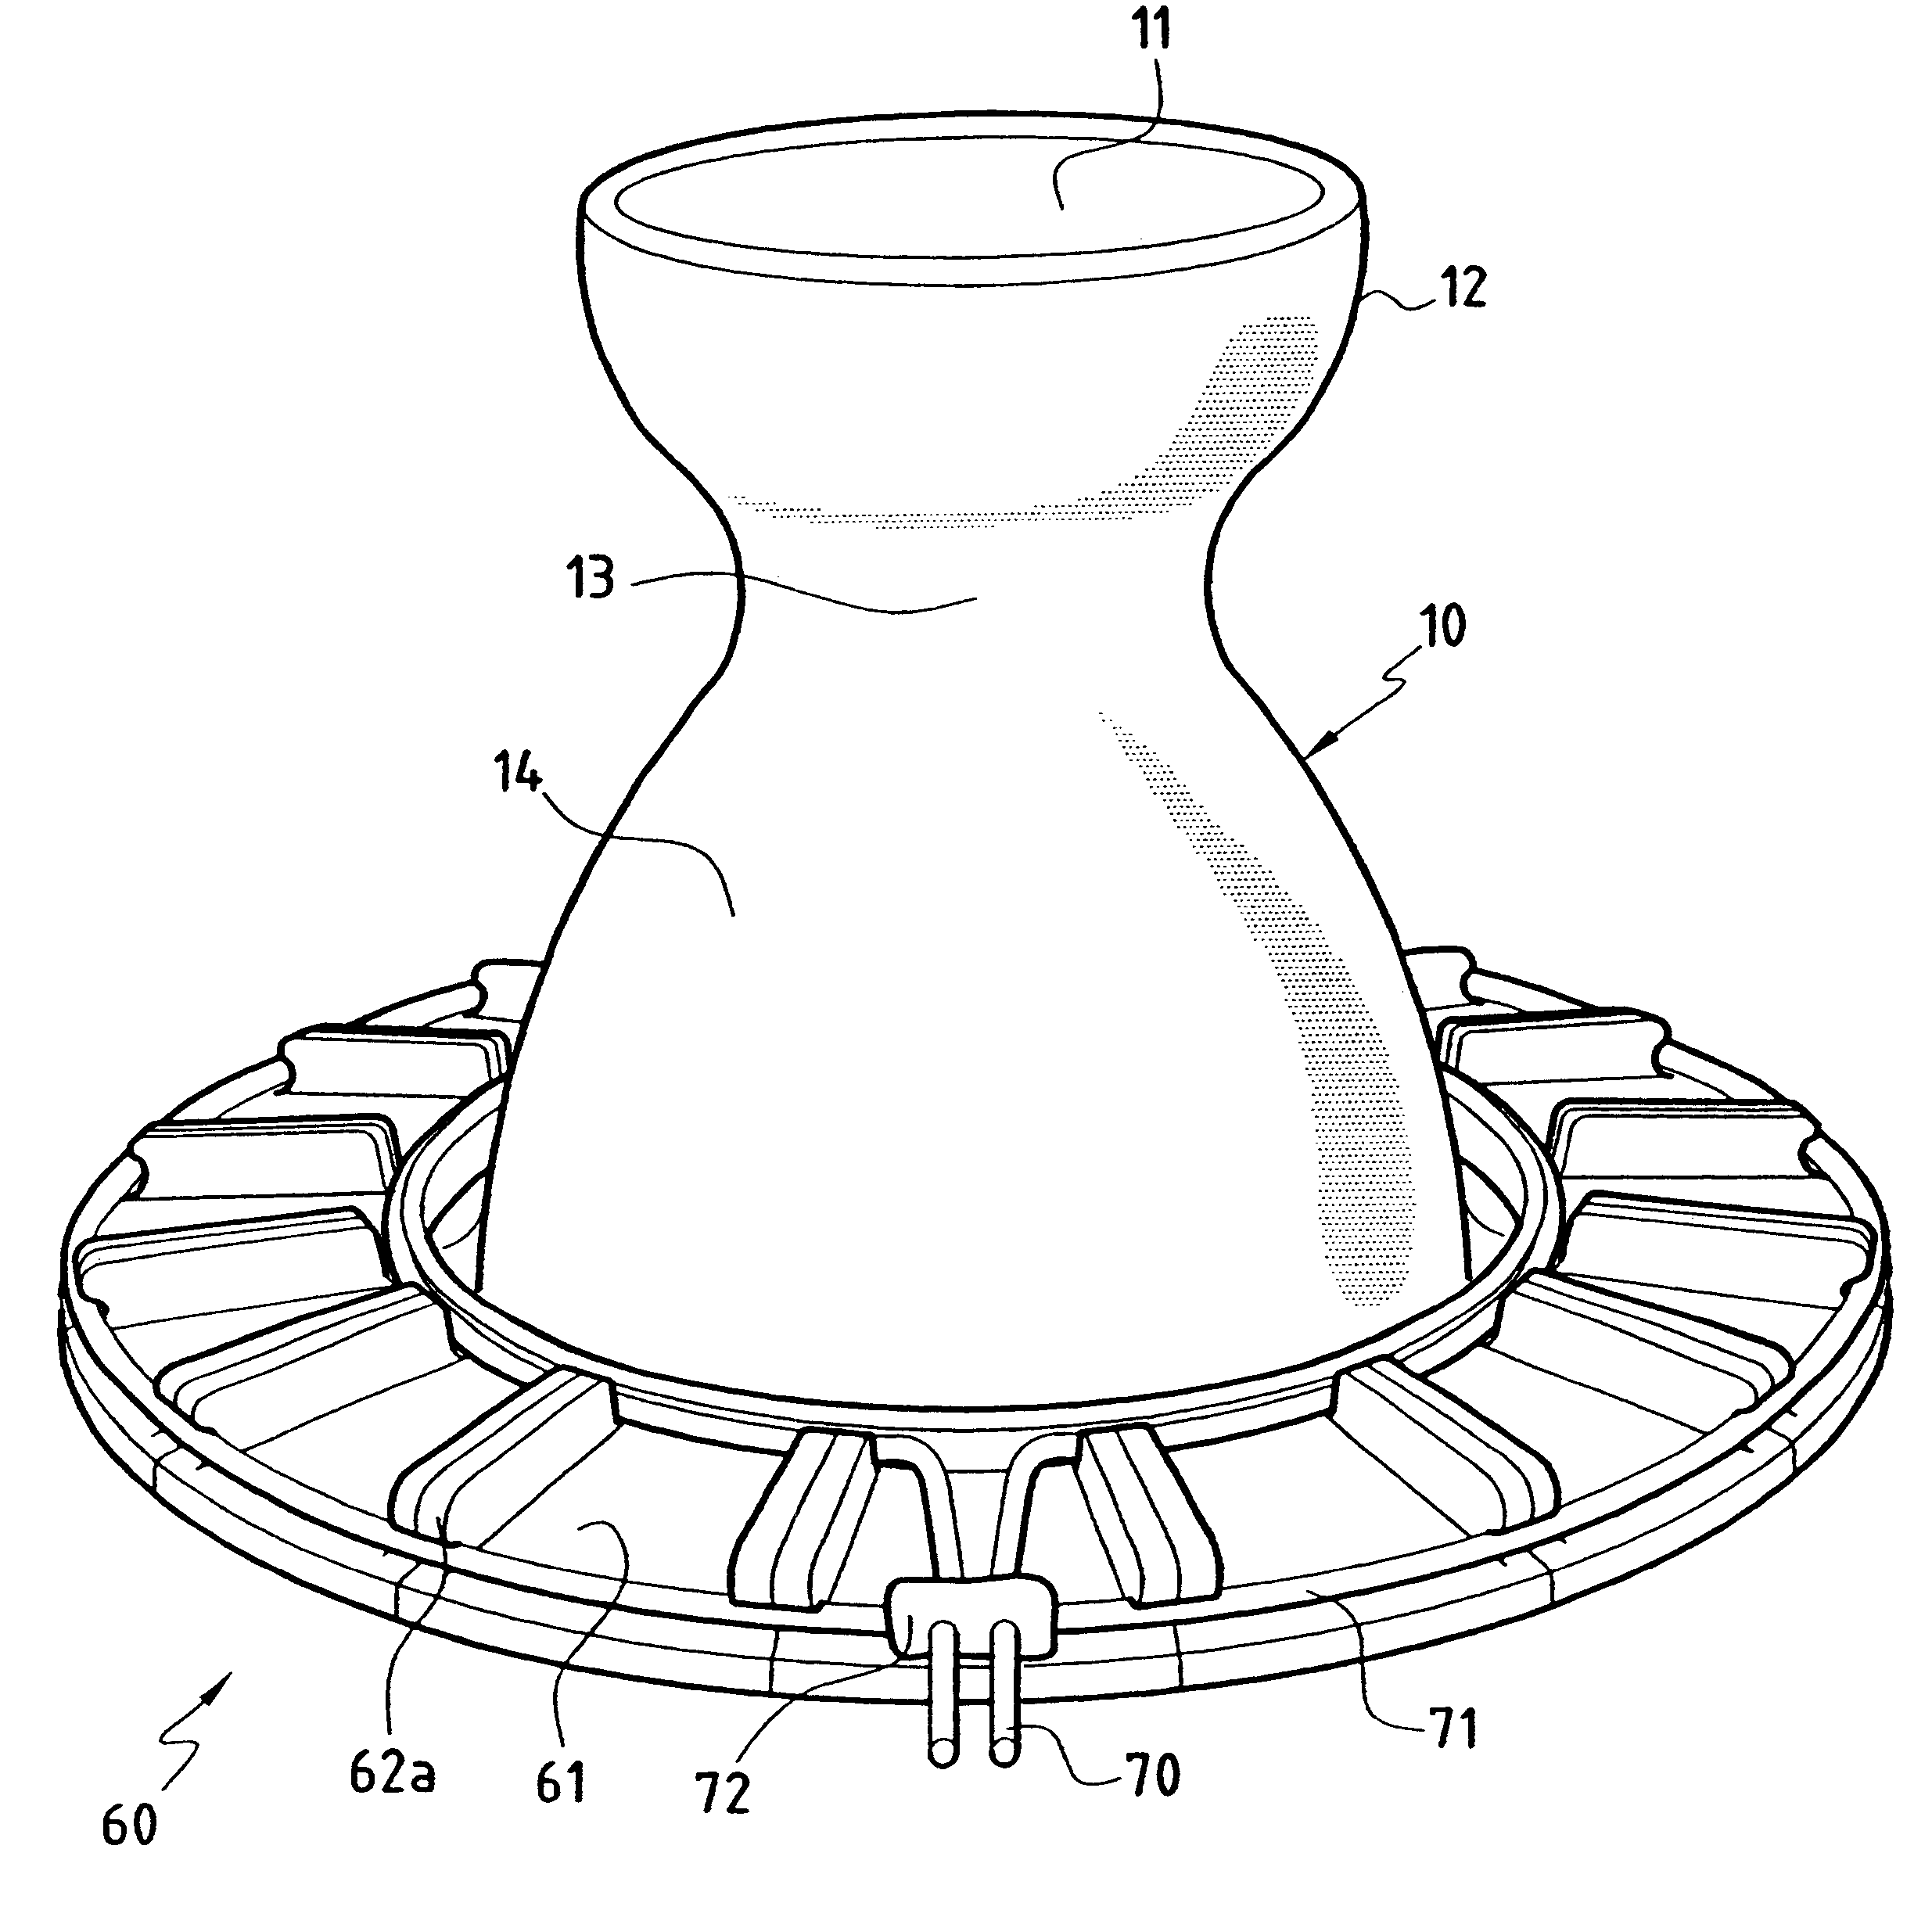 Device for displacing to nozzle outlet or eliminating jet separation in rocket engine nozzles, and a nozzle including the device